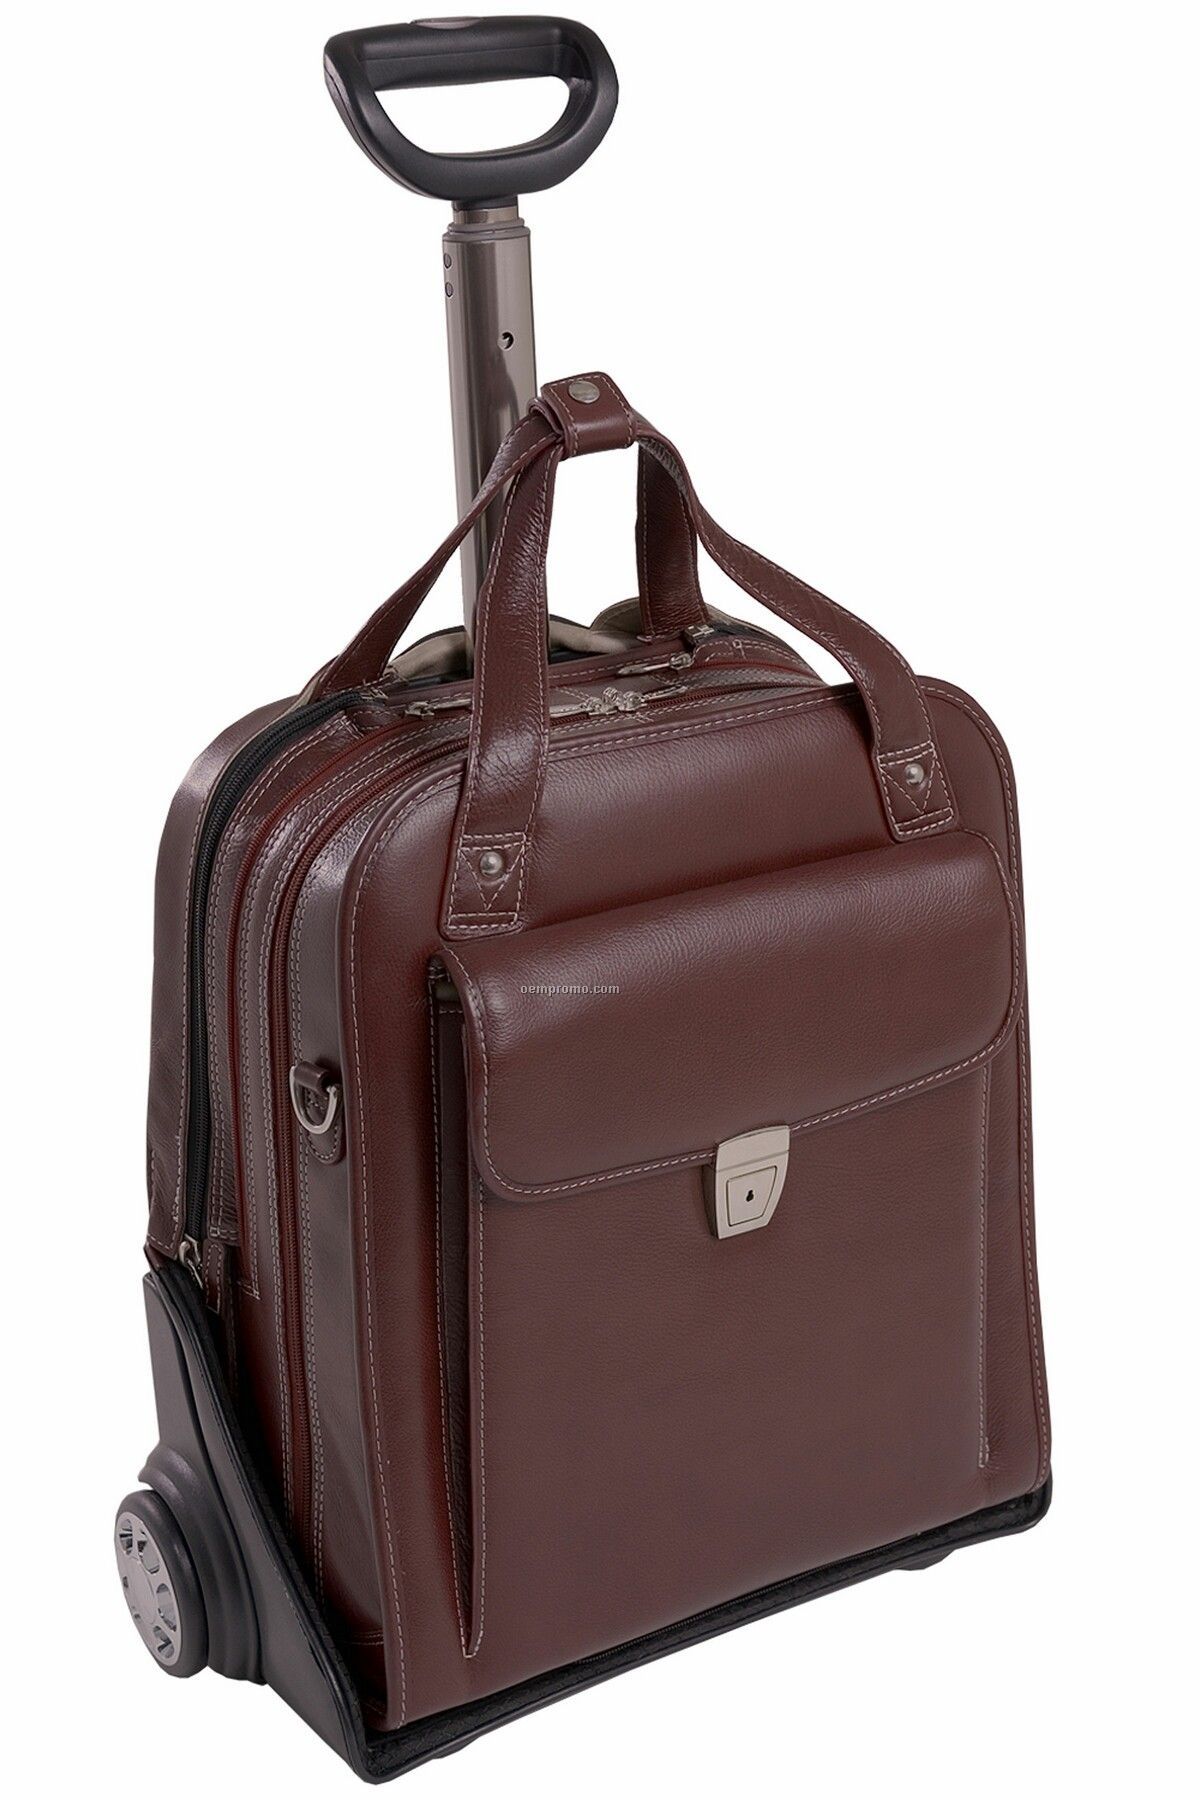 Pastenello Leather Vertical Wheeled Laptop Case - Cherry Red